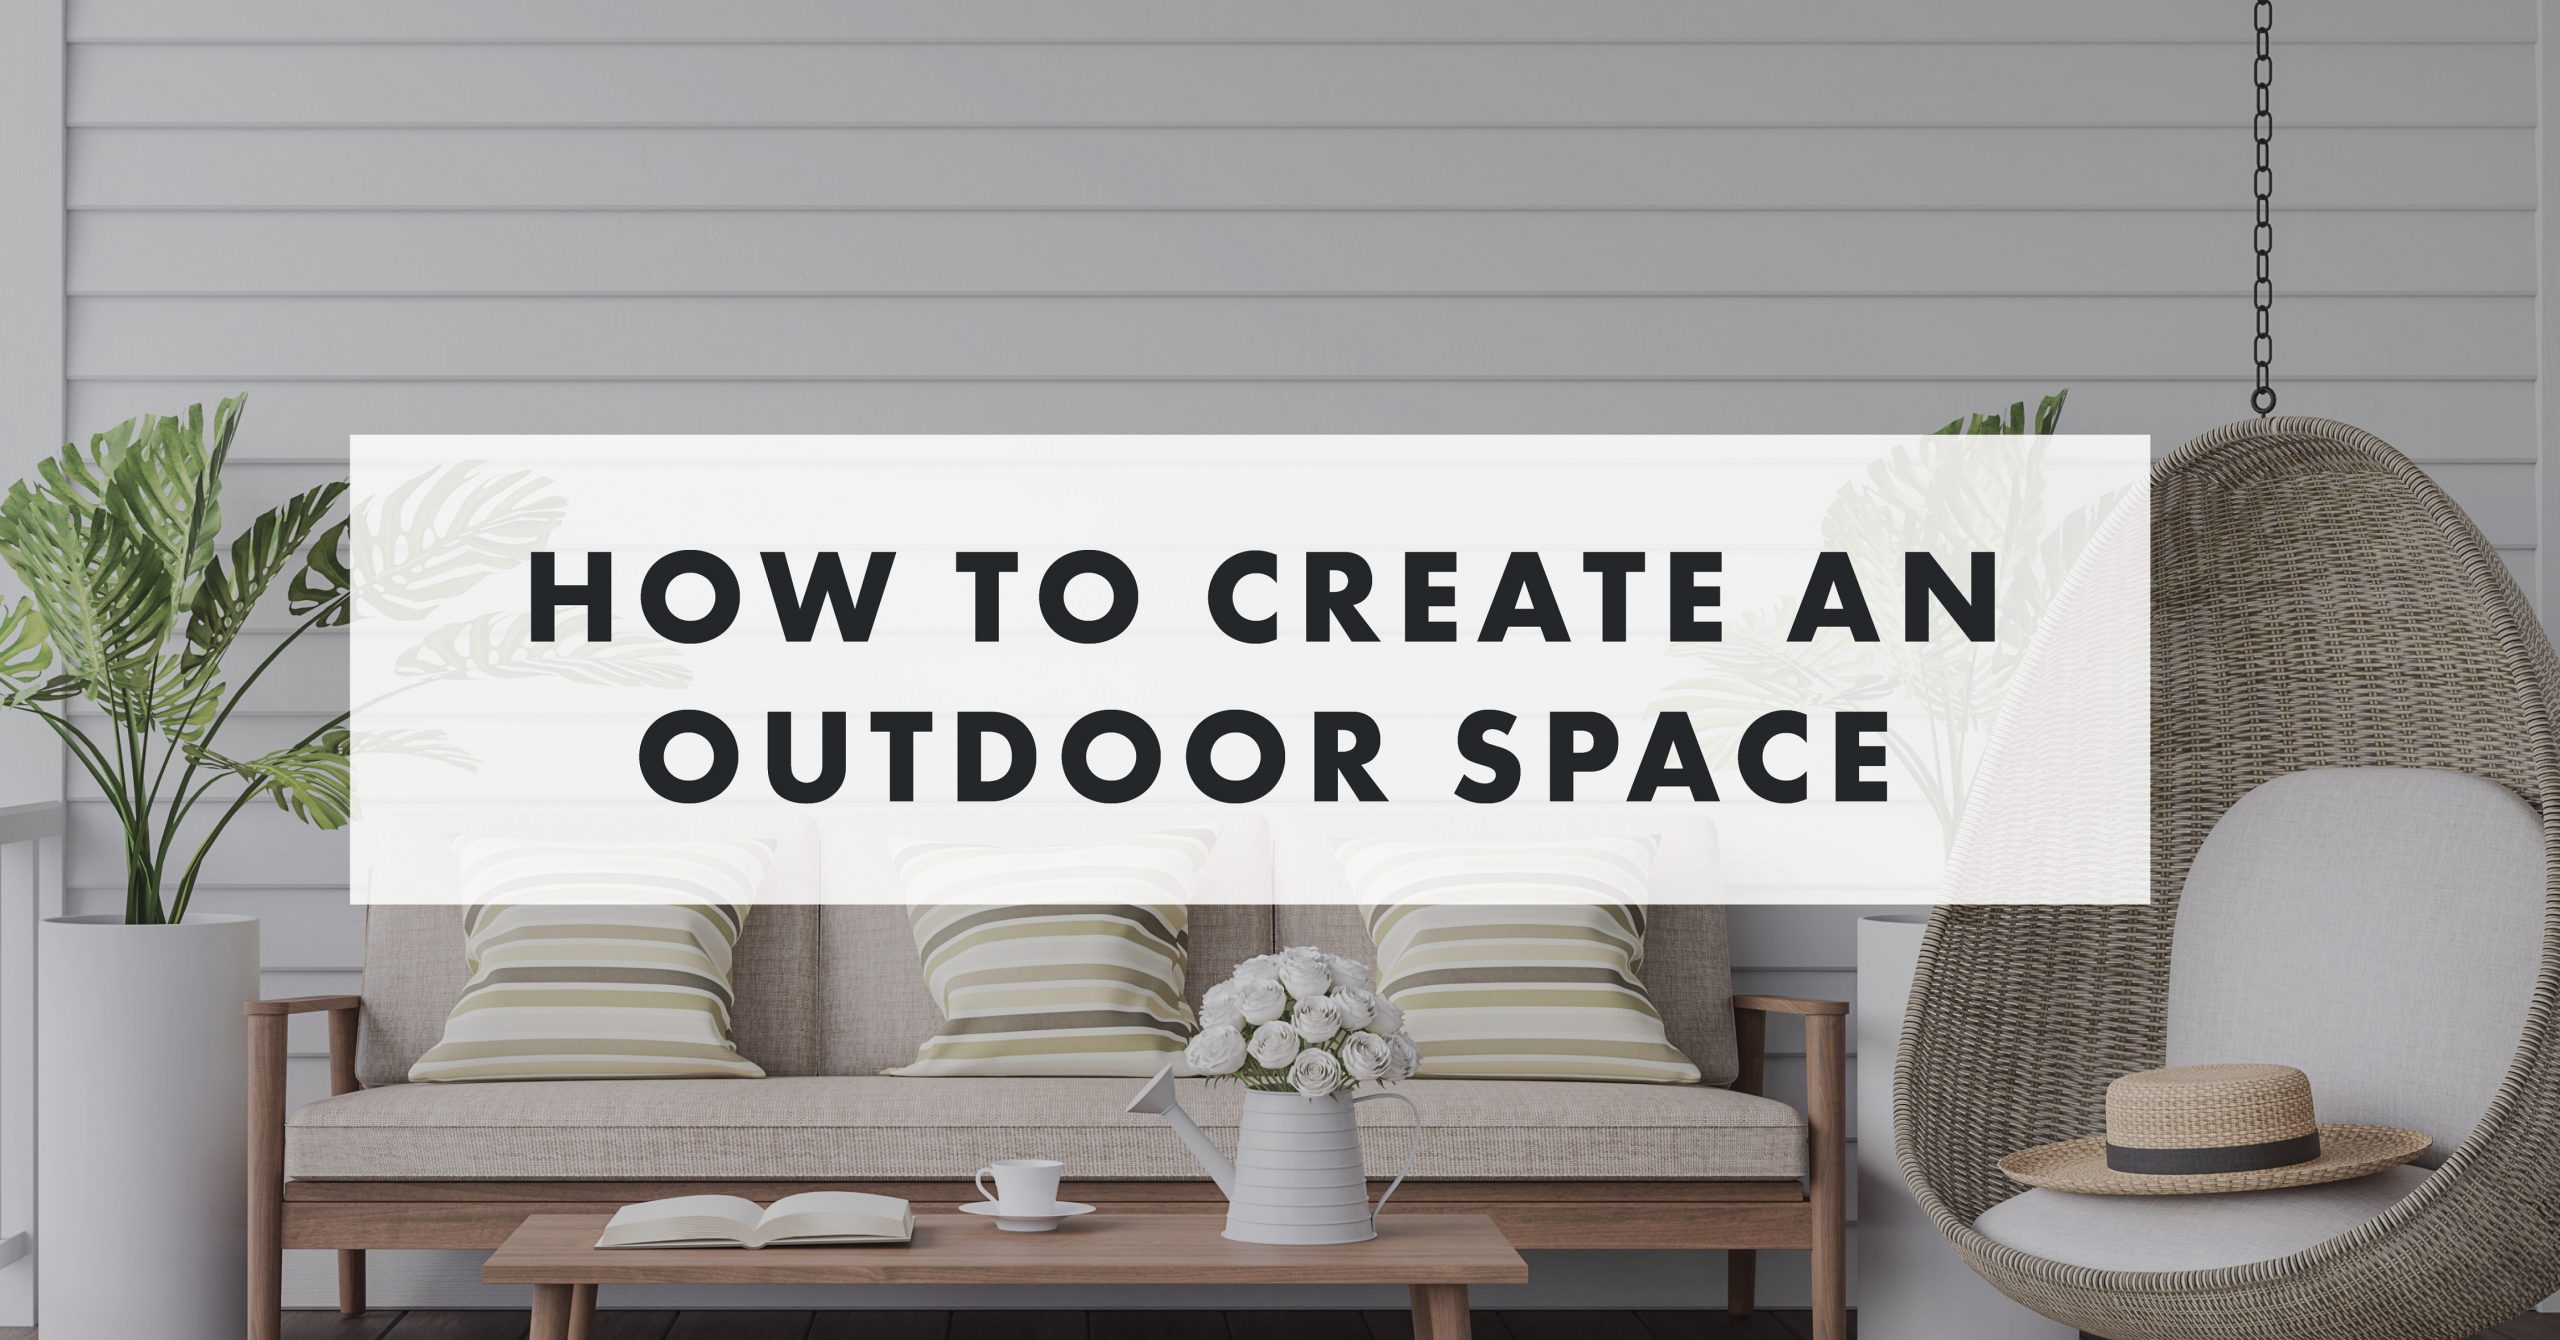 How to Create an Outdoor Space